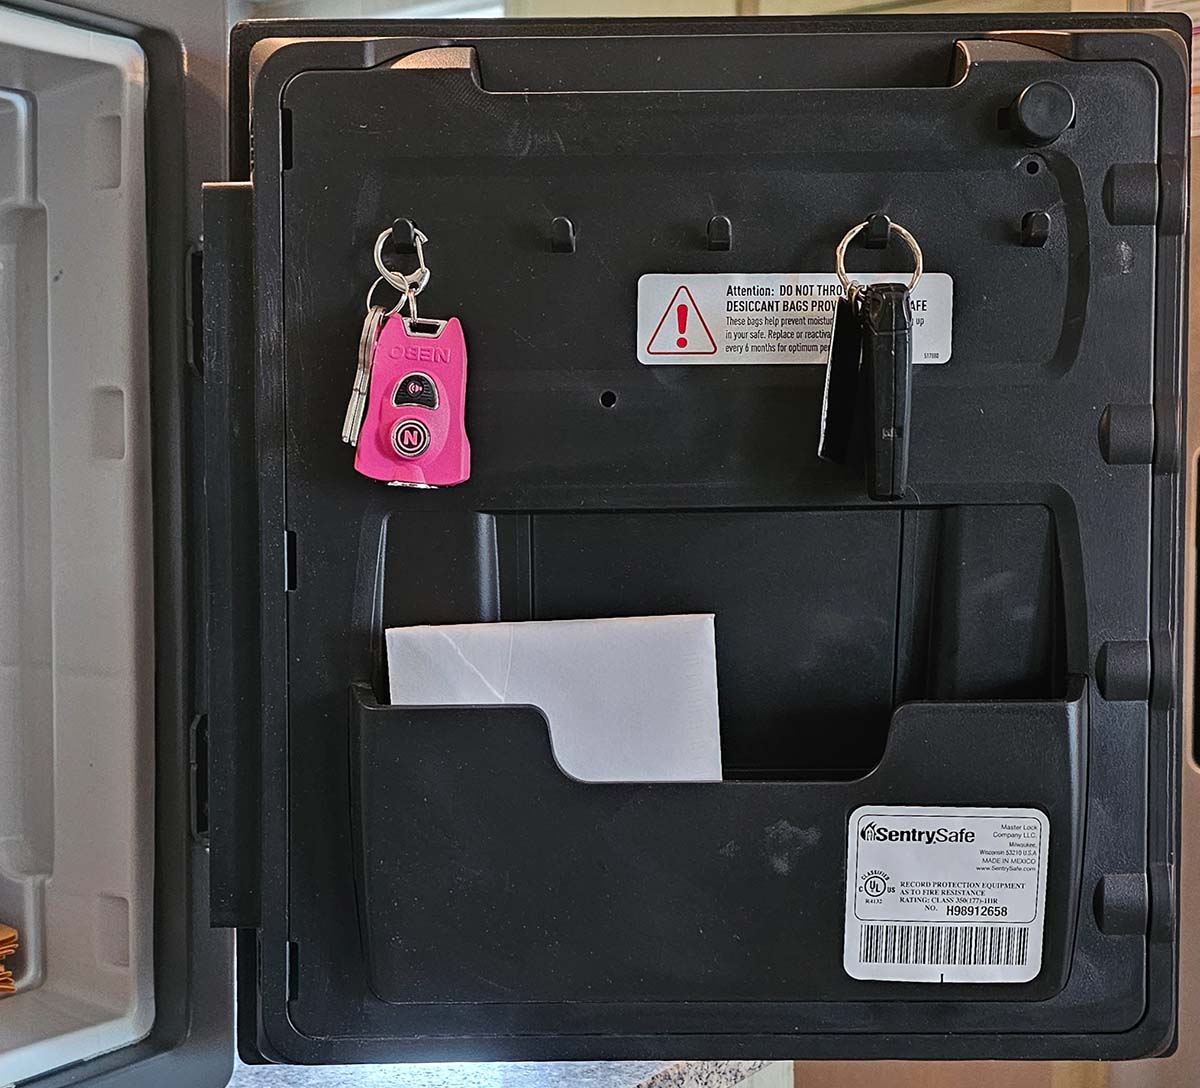 Inside the SentrySafe's door with two sets of keys hanging and a document in a pocket